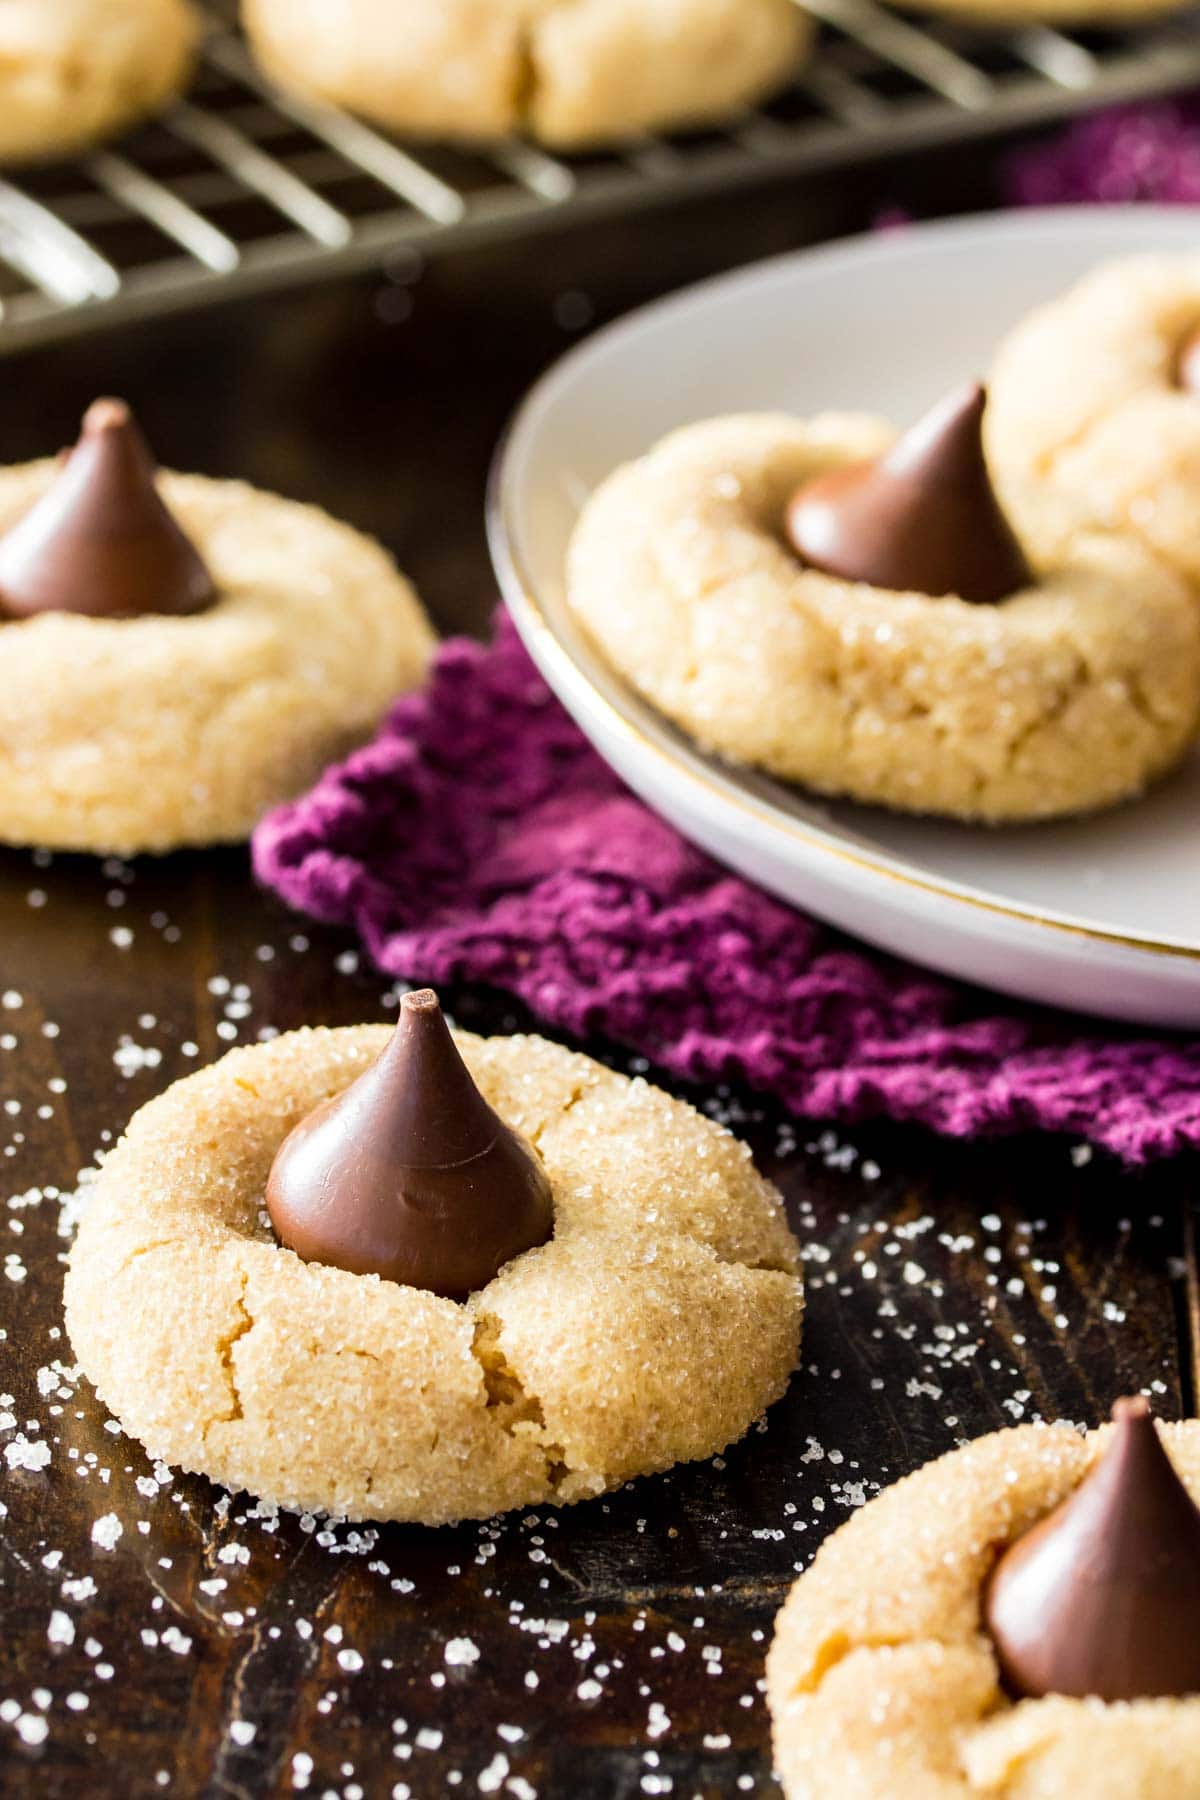 Peanut butter cookies that have been rolled in sugar and topped with chocolate kisses.